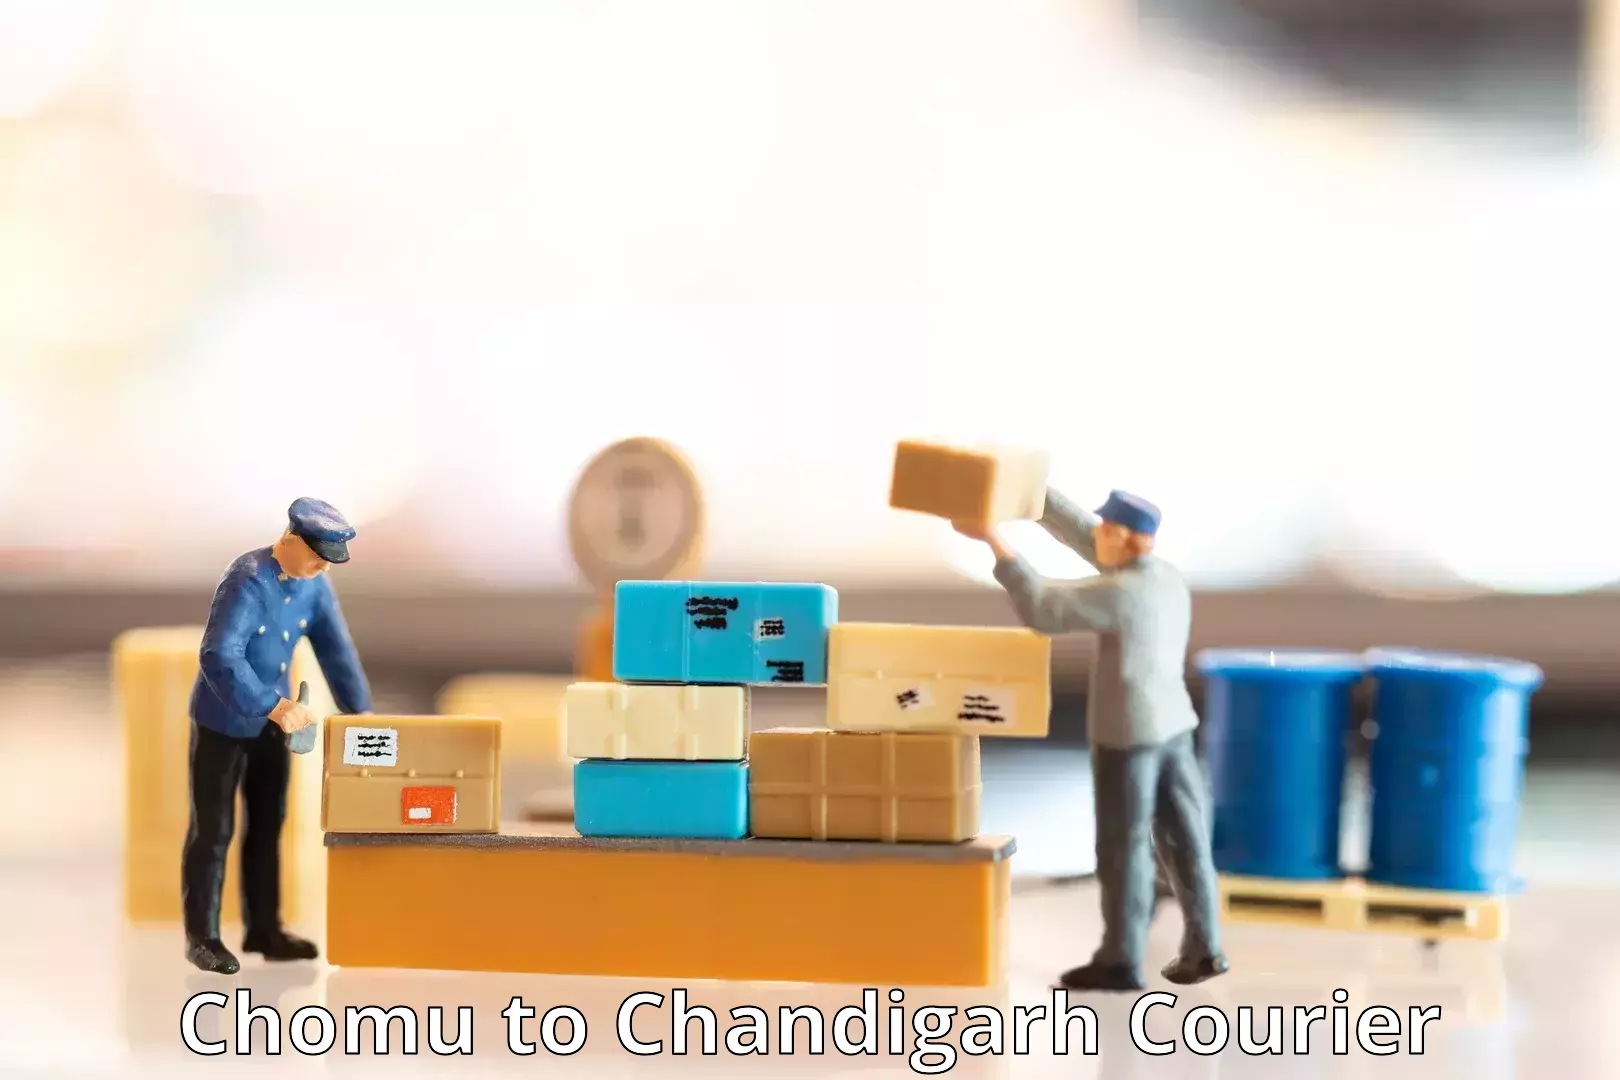 On-call courier service Chomu to Chandigarh